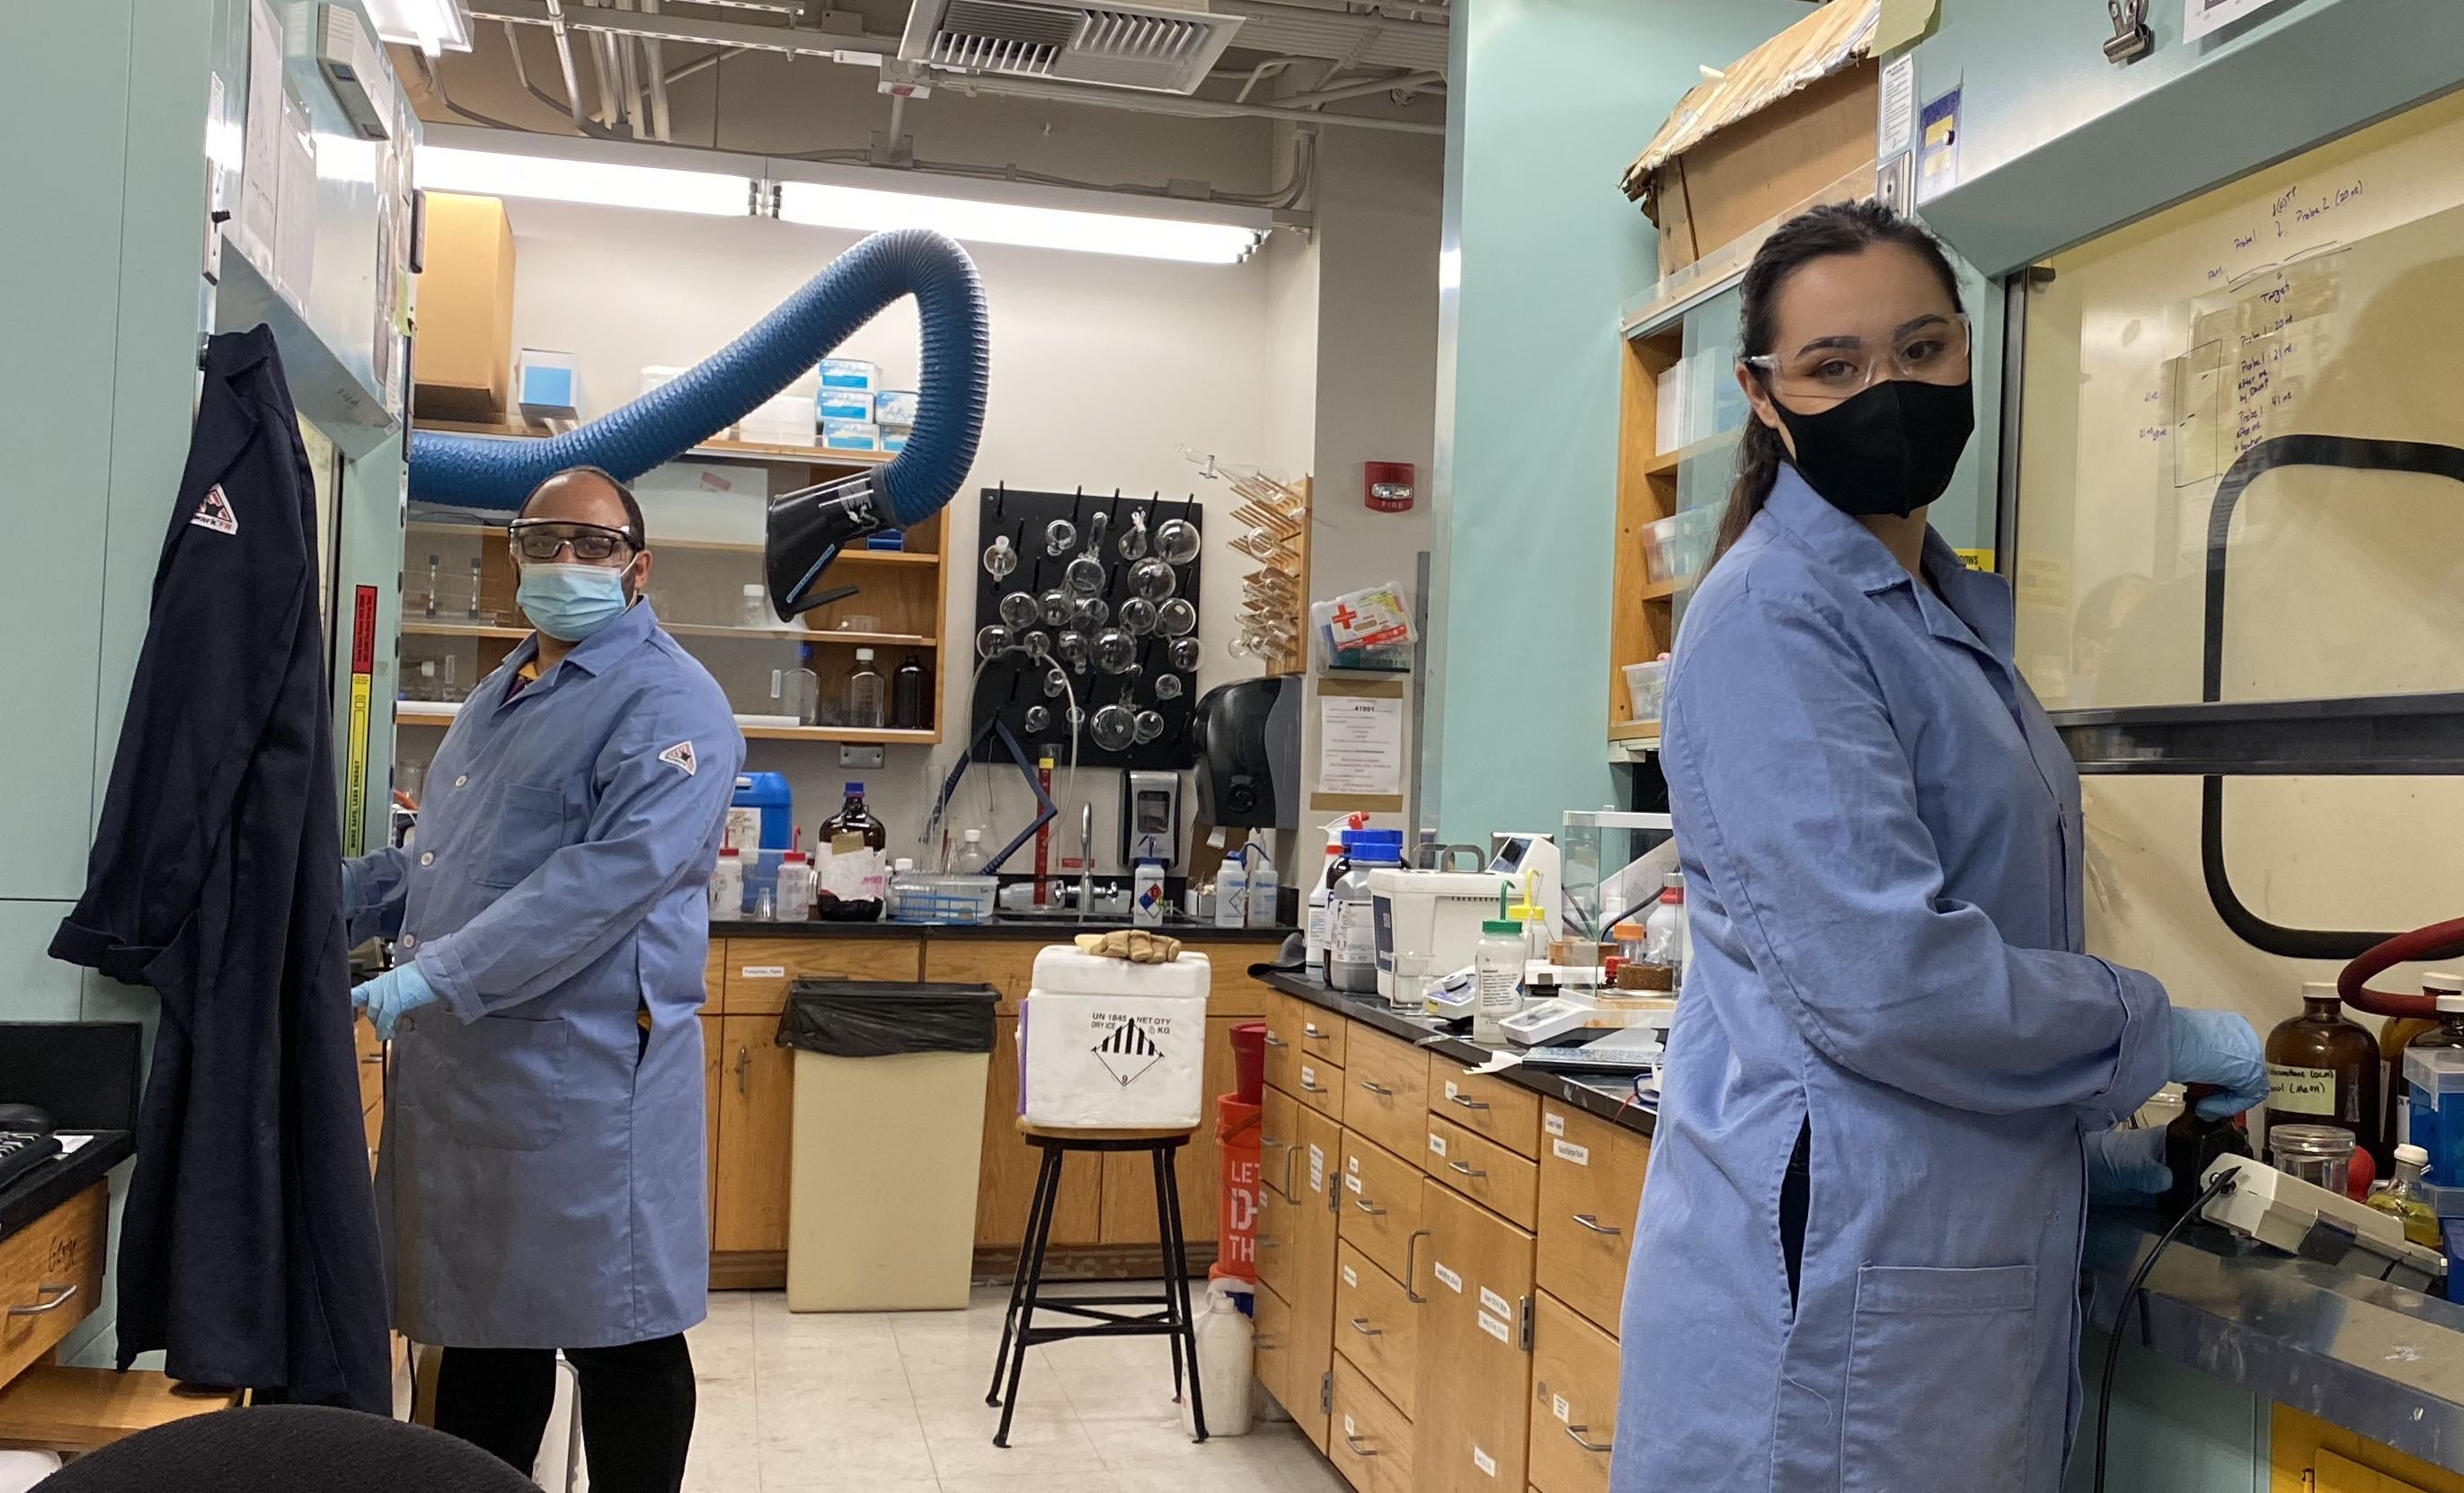 Recent SWC transfer and Mentored Pathways student Sophia Alvarado Hernandez works in the Purse lab with her graduate student mentor, George Samaan. Photo by Dr. Pratibha Kumar